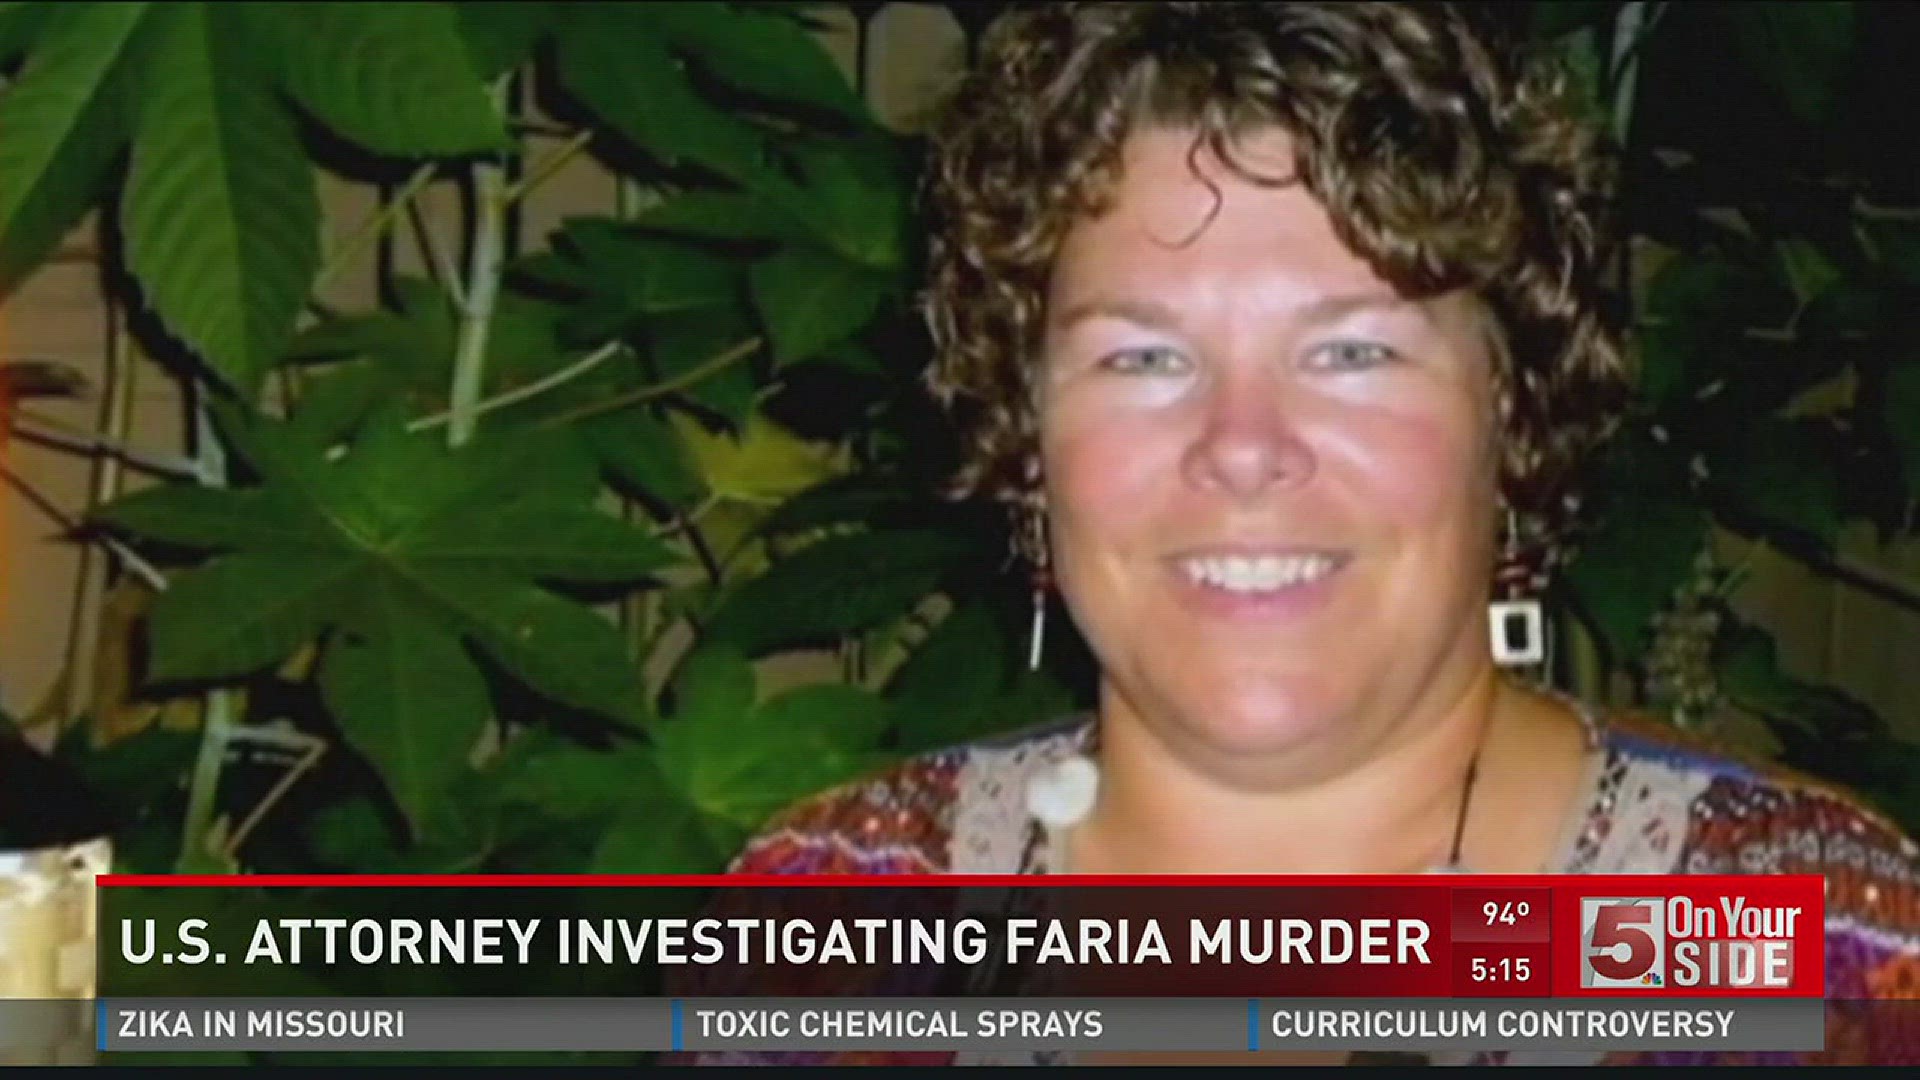 We've learned the Lincoln County Prosecutor is now working with the U.S. Attorney on the Besty Faria murder case.